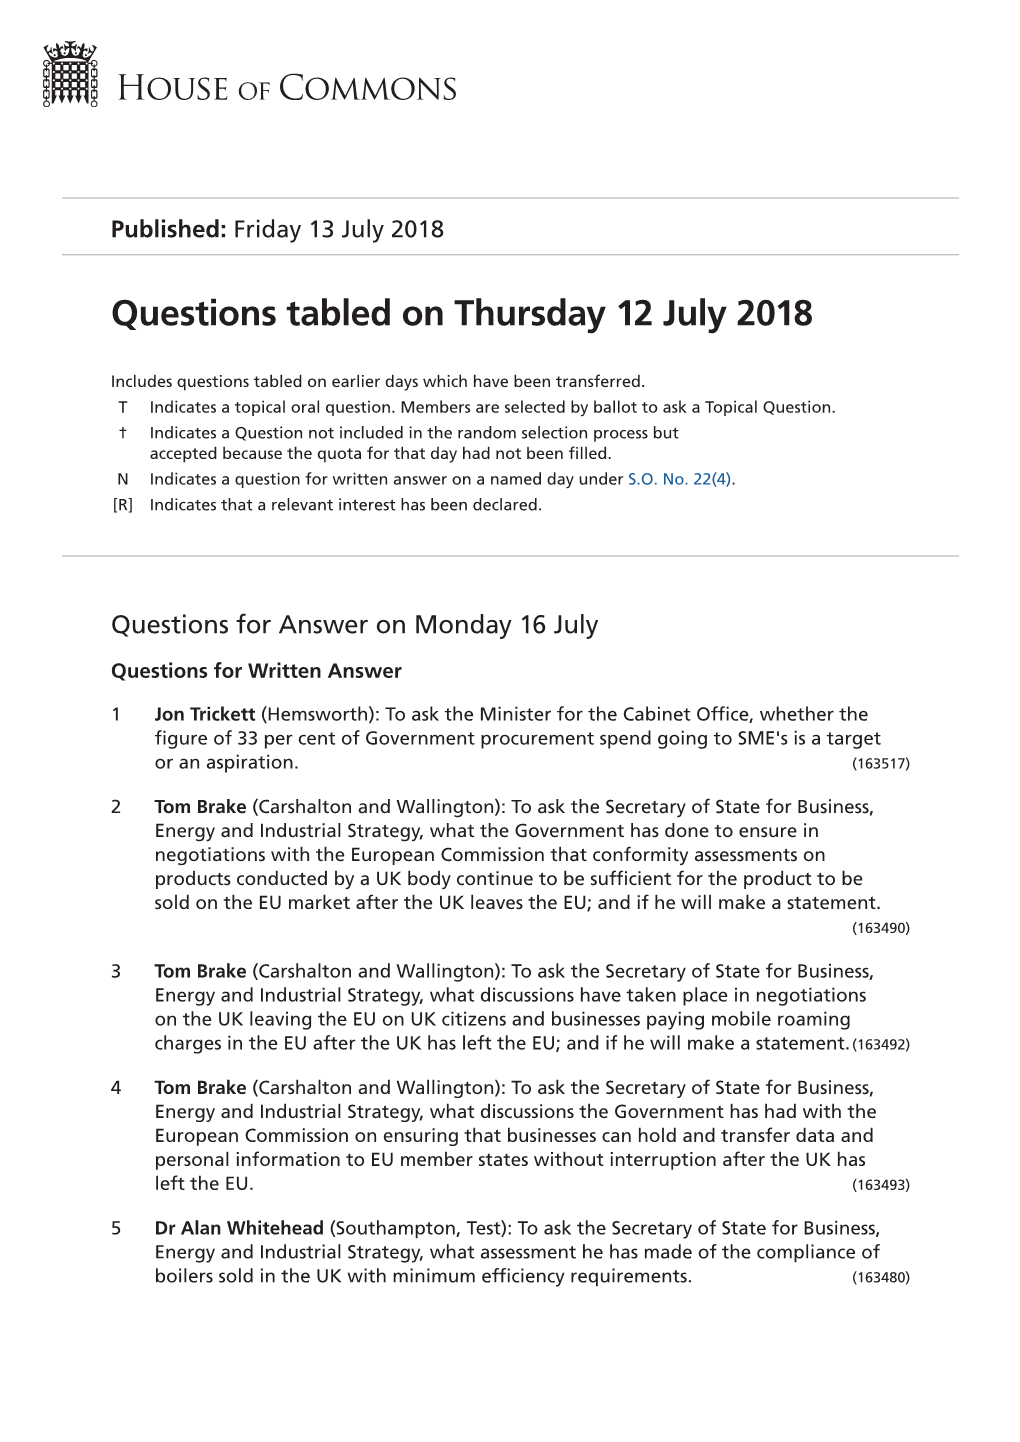 Questions Tabled on Thu 12 Jul 2018